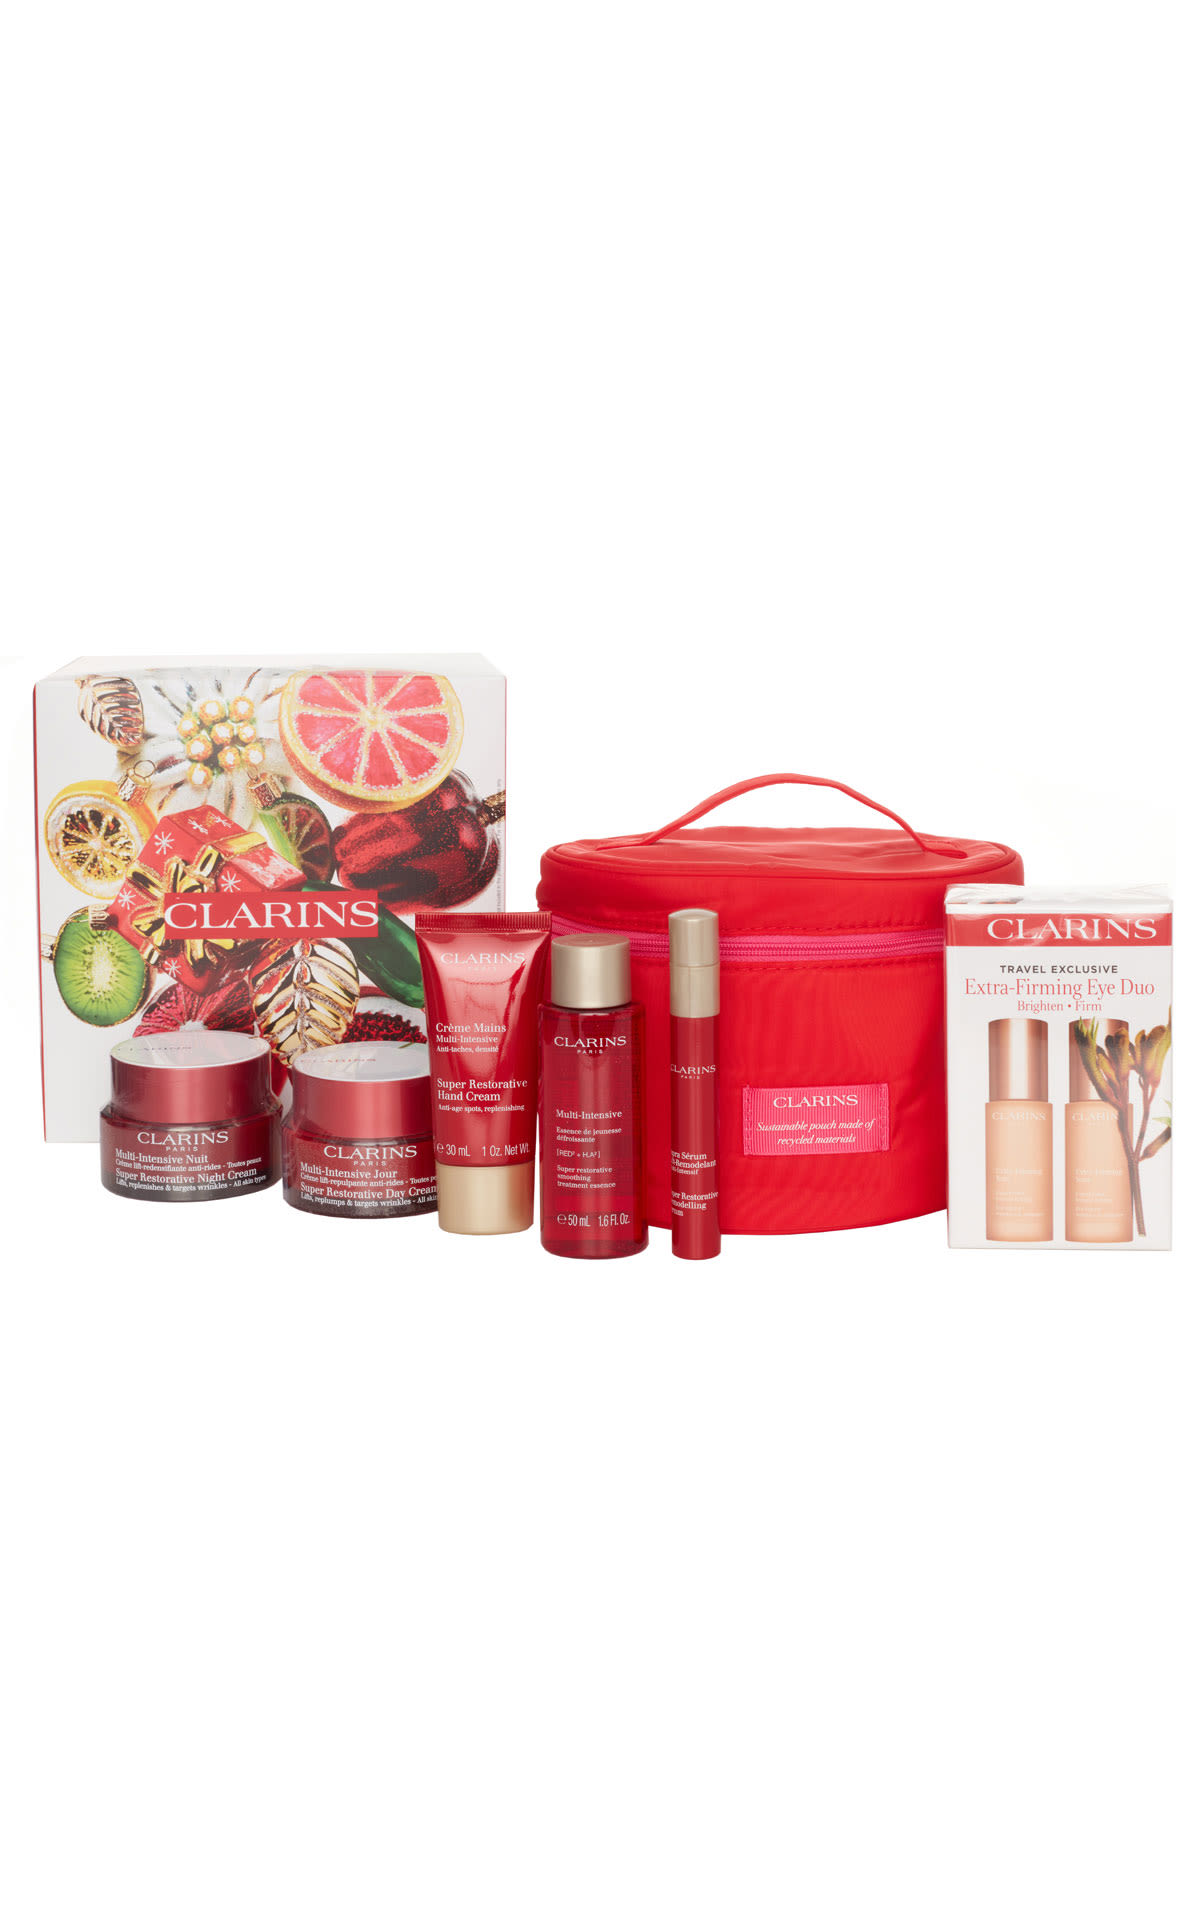 Clarins Super restorative and firming eye duo from Bicester Village